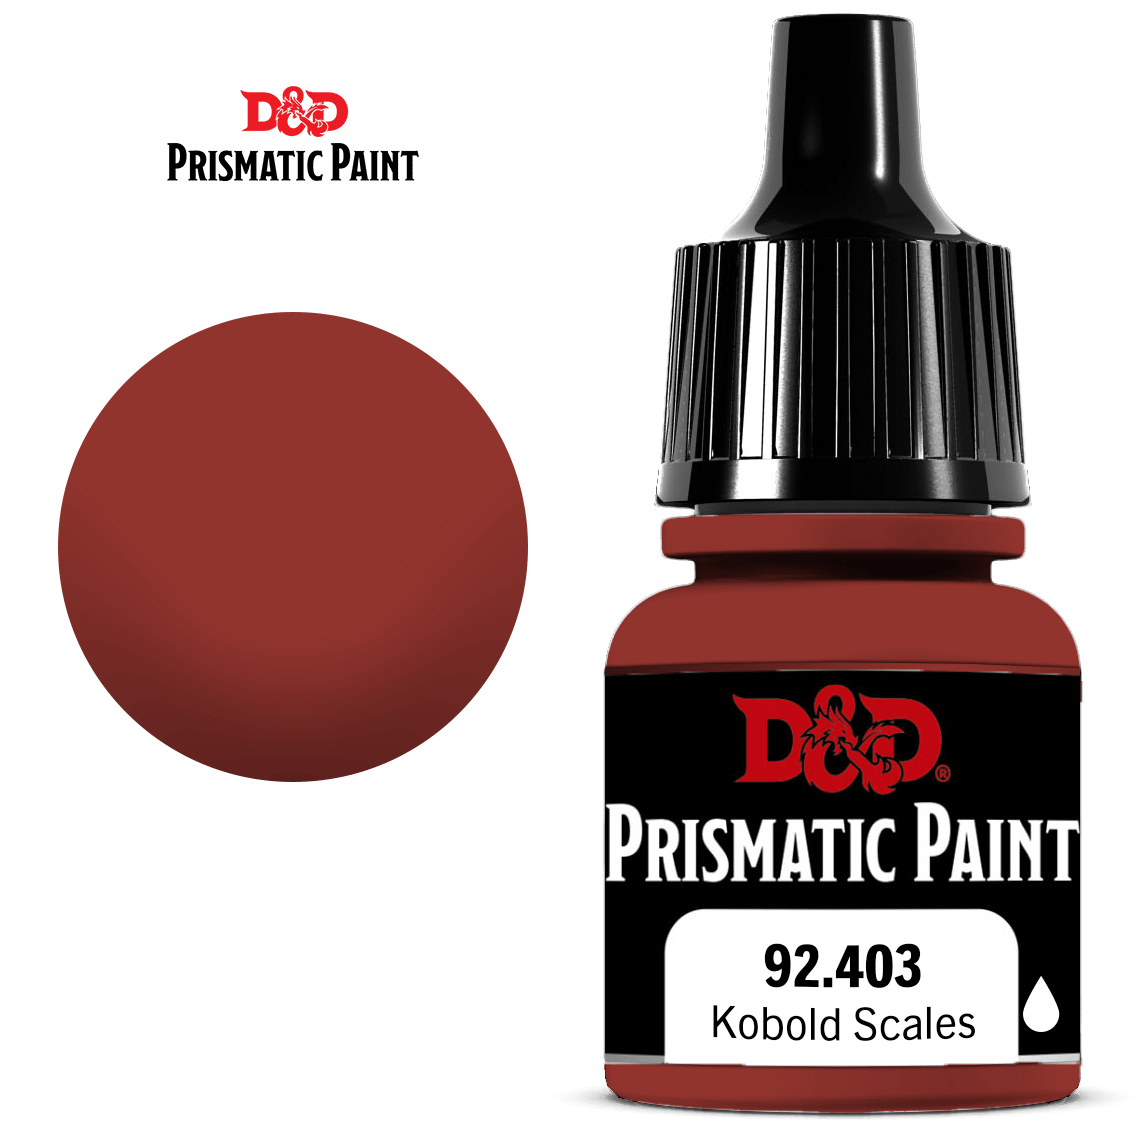 PRISMATIC PAINT: KOBOLD SCALES | BD Cosmos